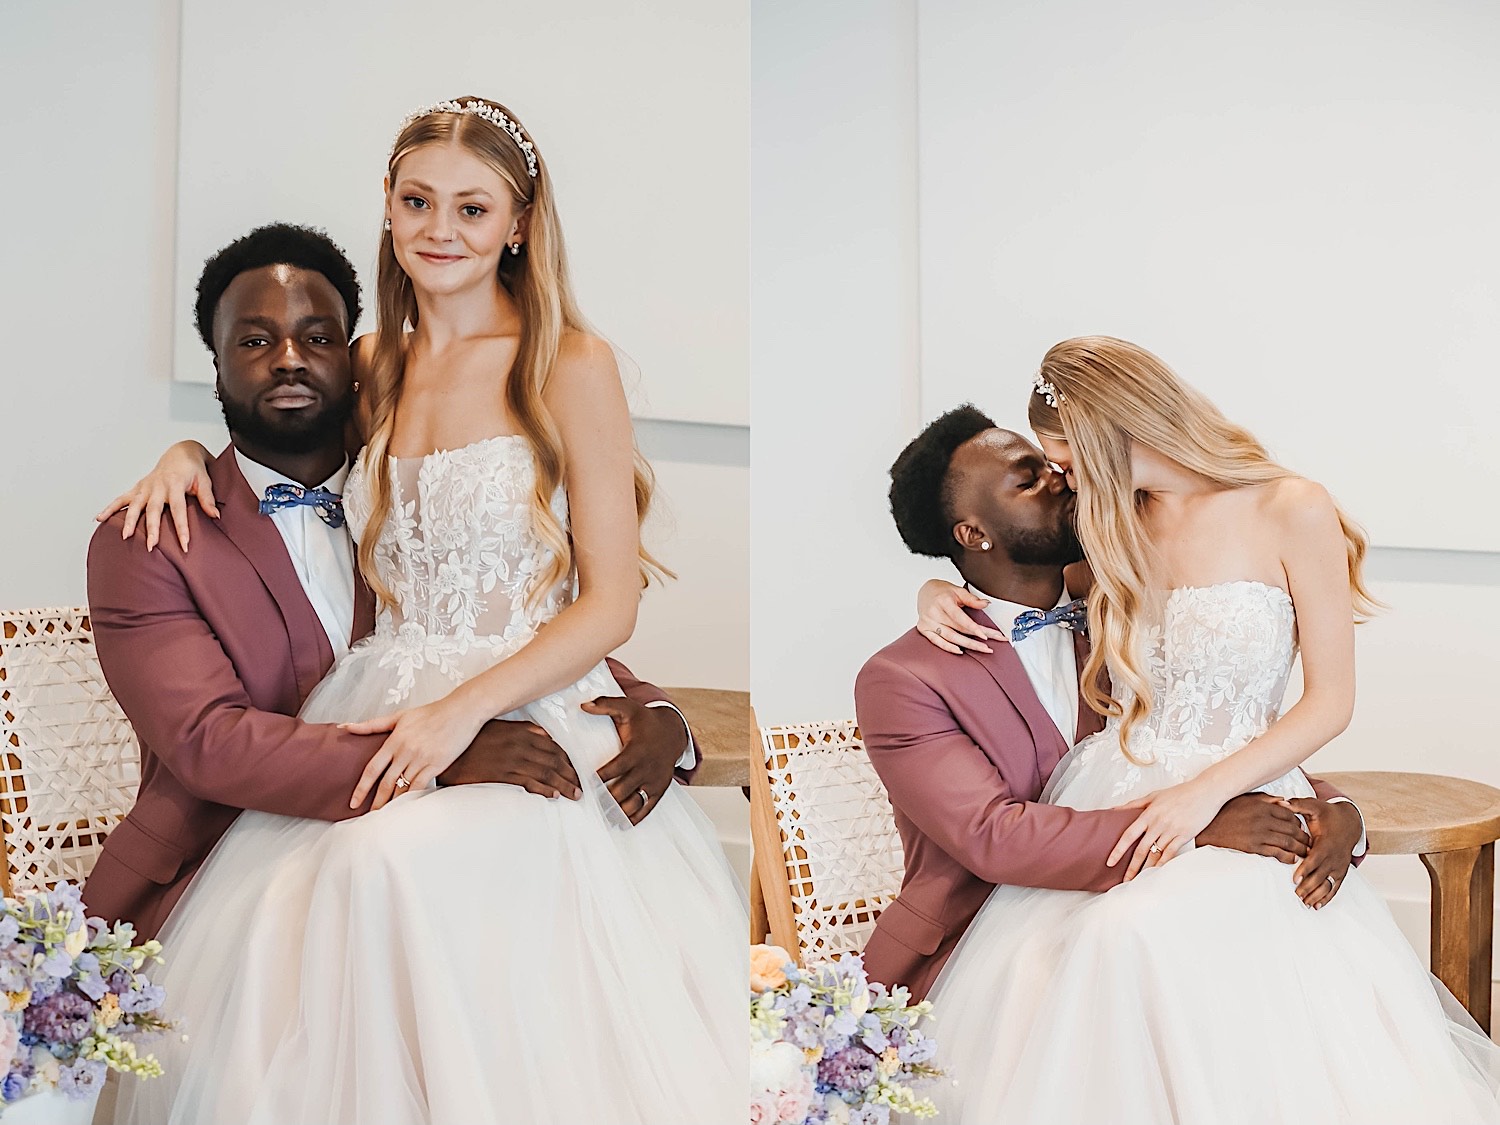 2 photos side by side of a bride sitting on the groom's lap, the left photo has them smiling at the camera and the right is of them kissing